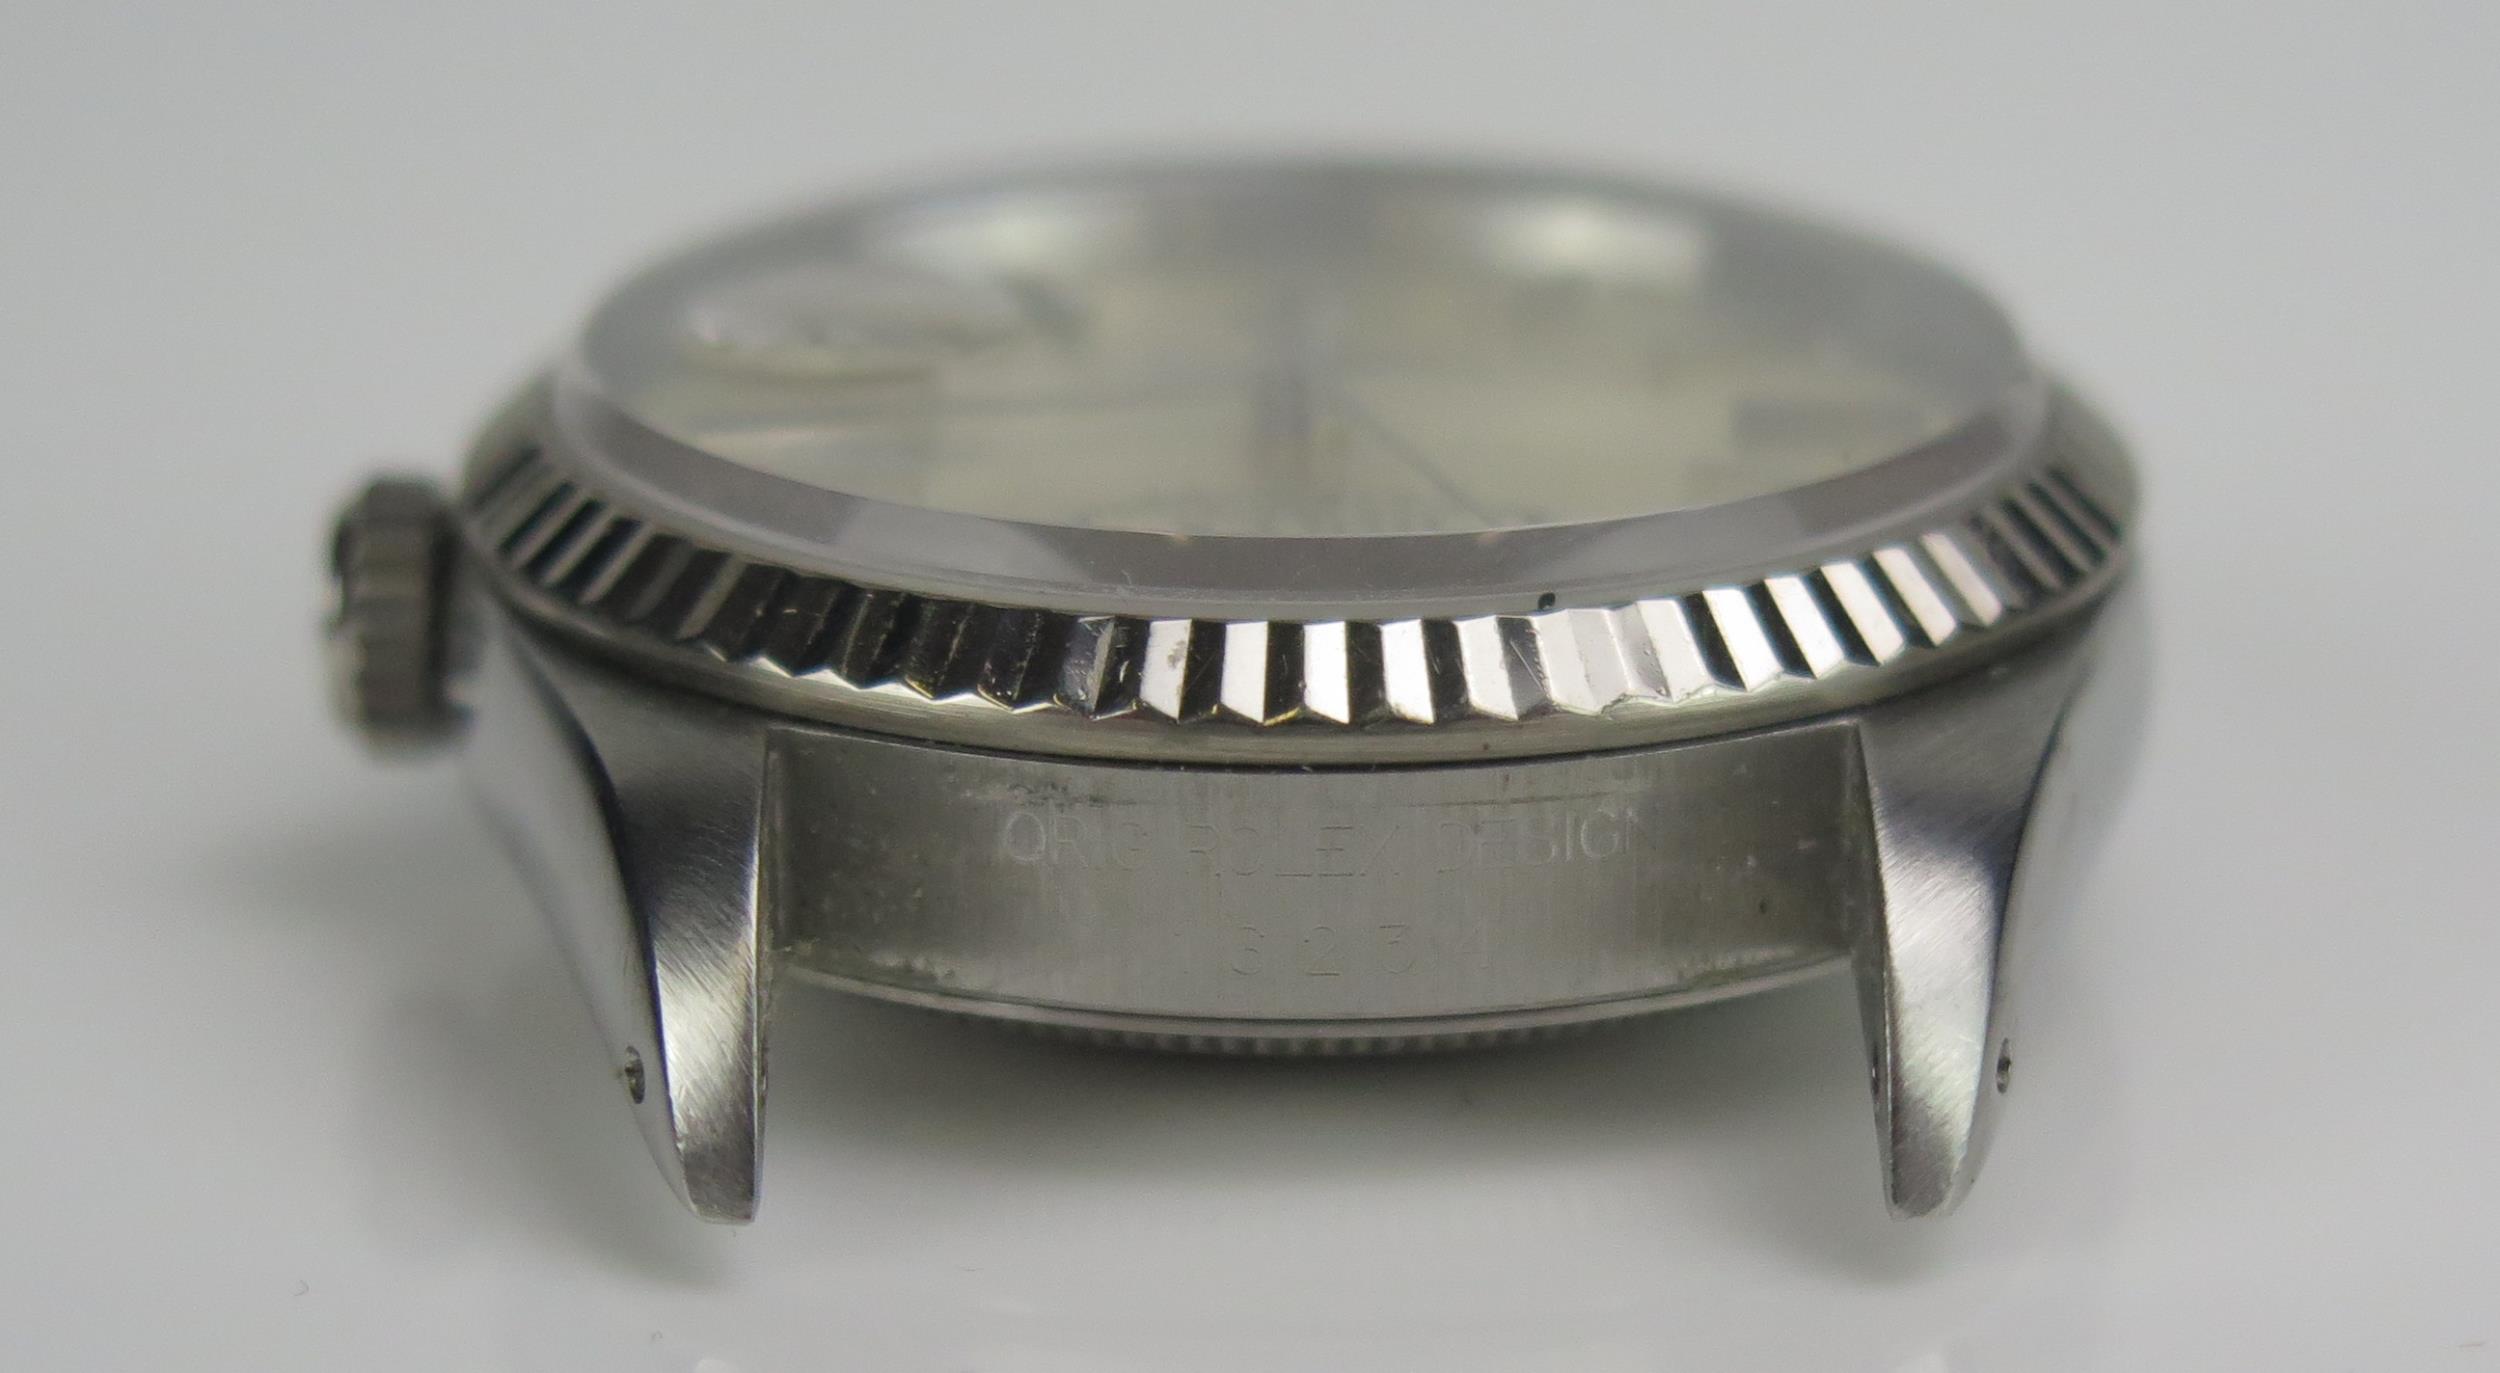 A ROLEX Gent's Oyster Perpetual Datejust S.C.O.C. Steel Cased Wristwatch on a 63600 Jubilee Bracelet - Image 5 of 10